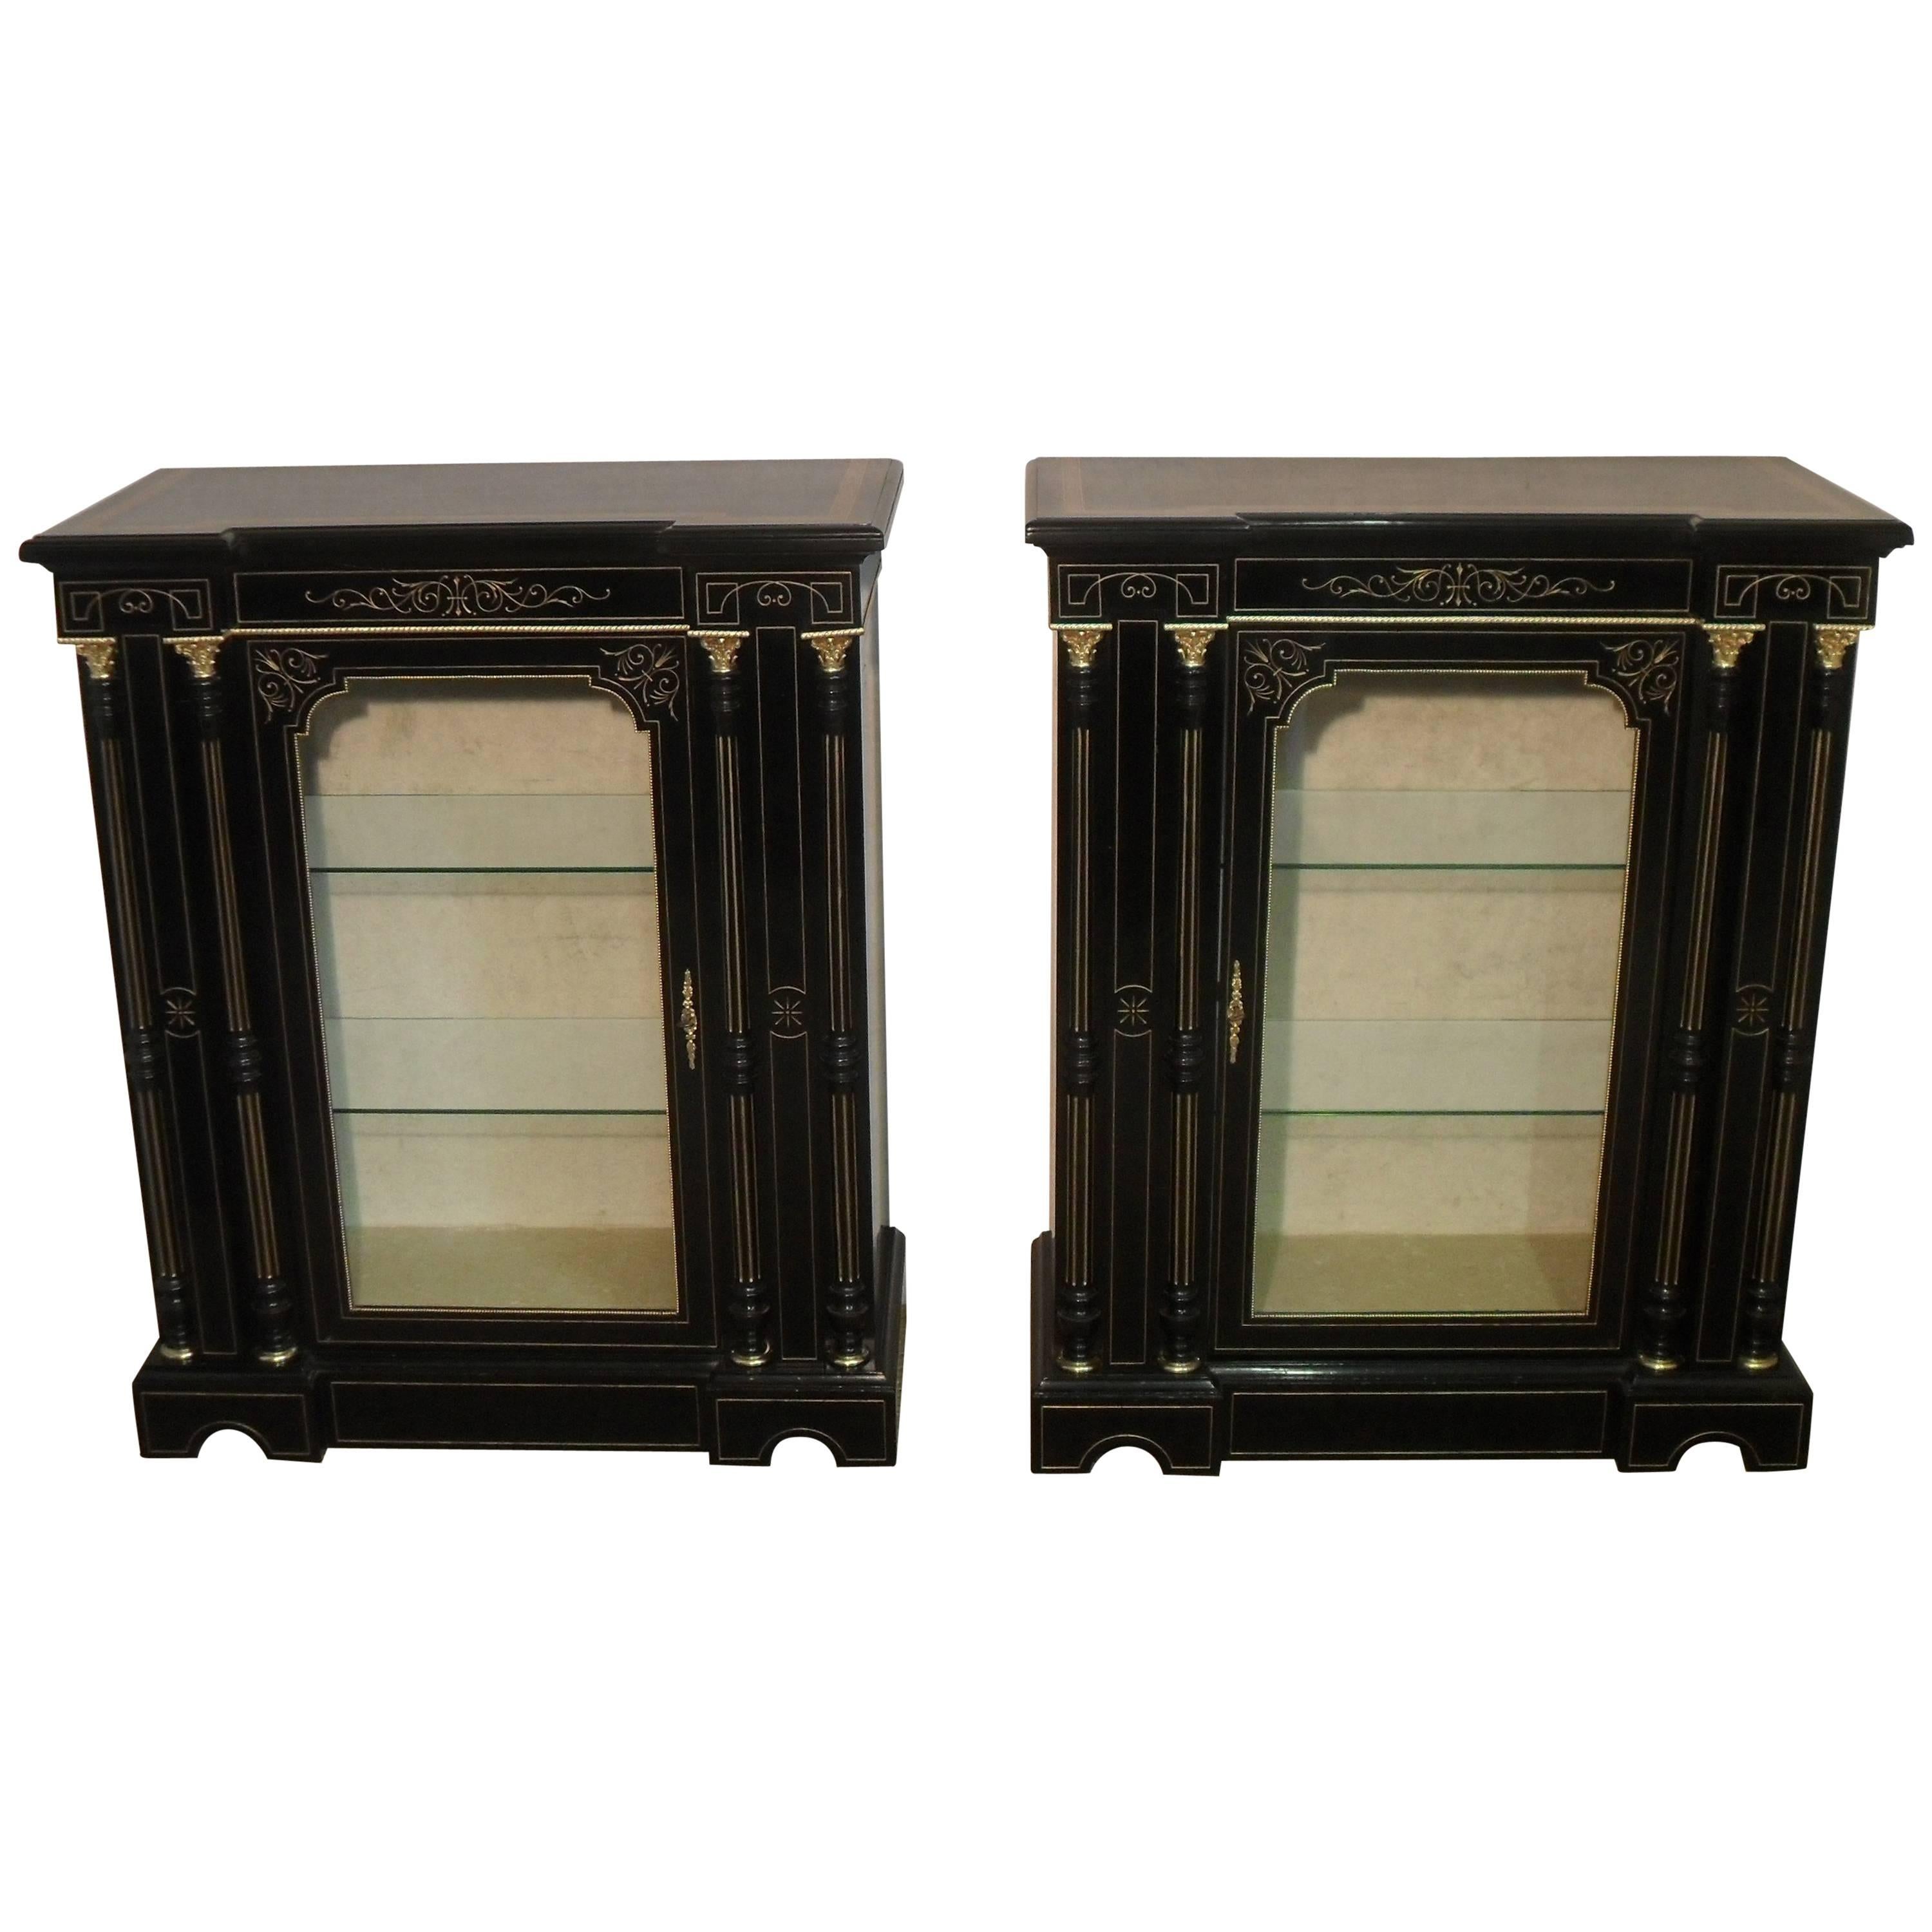 Pair of Victorian Aesthetic Movement Ebonized Display Cabinets or Bookcases